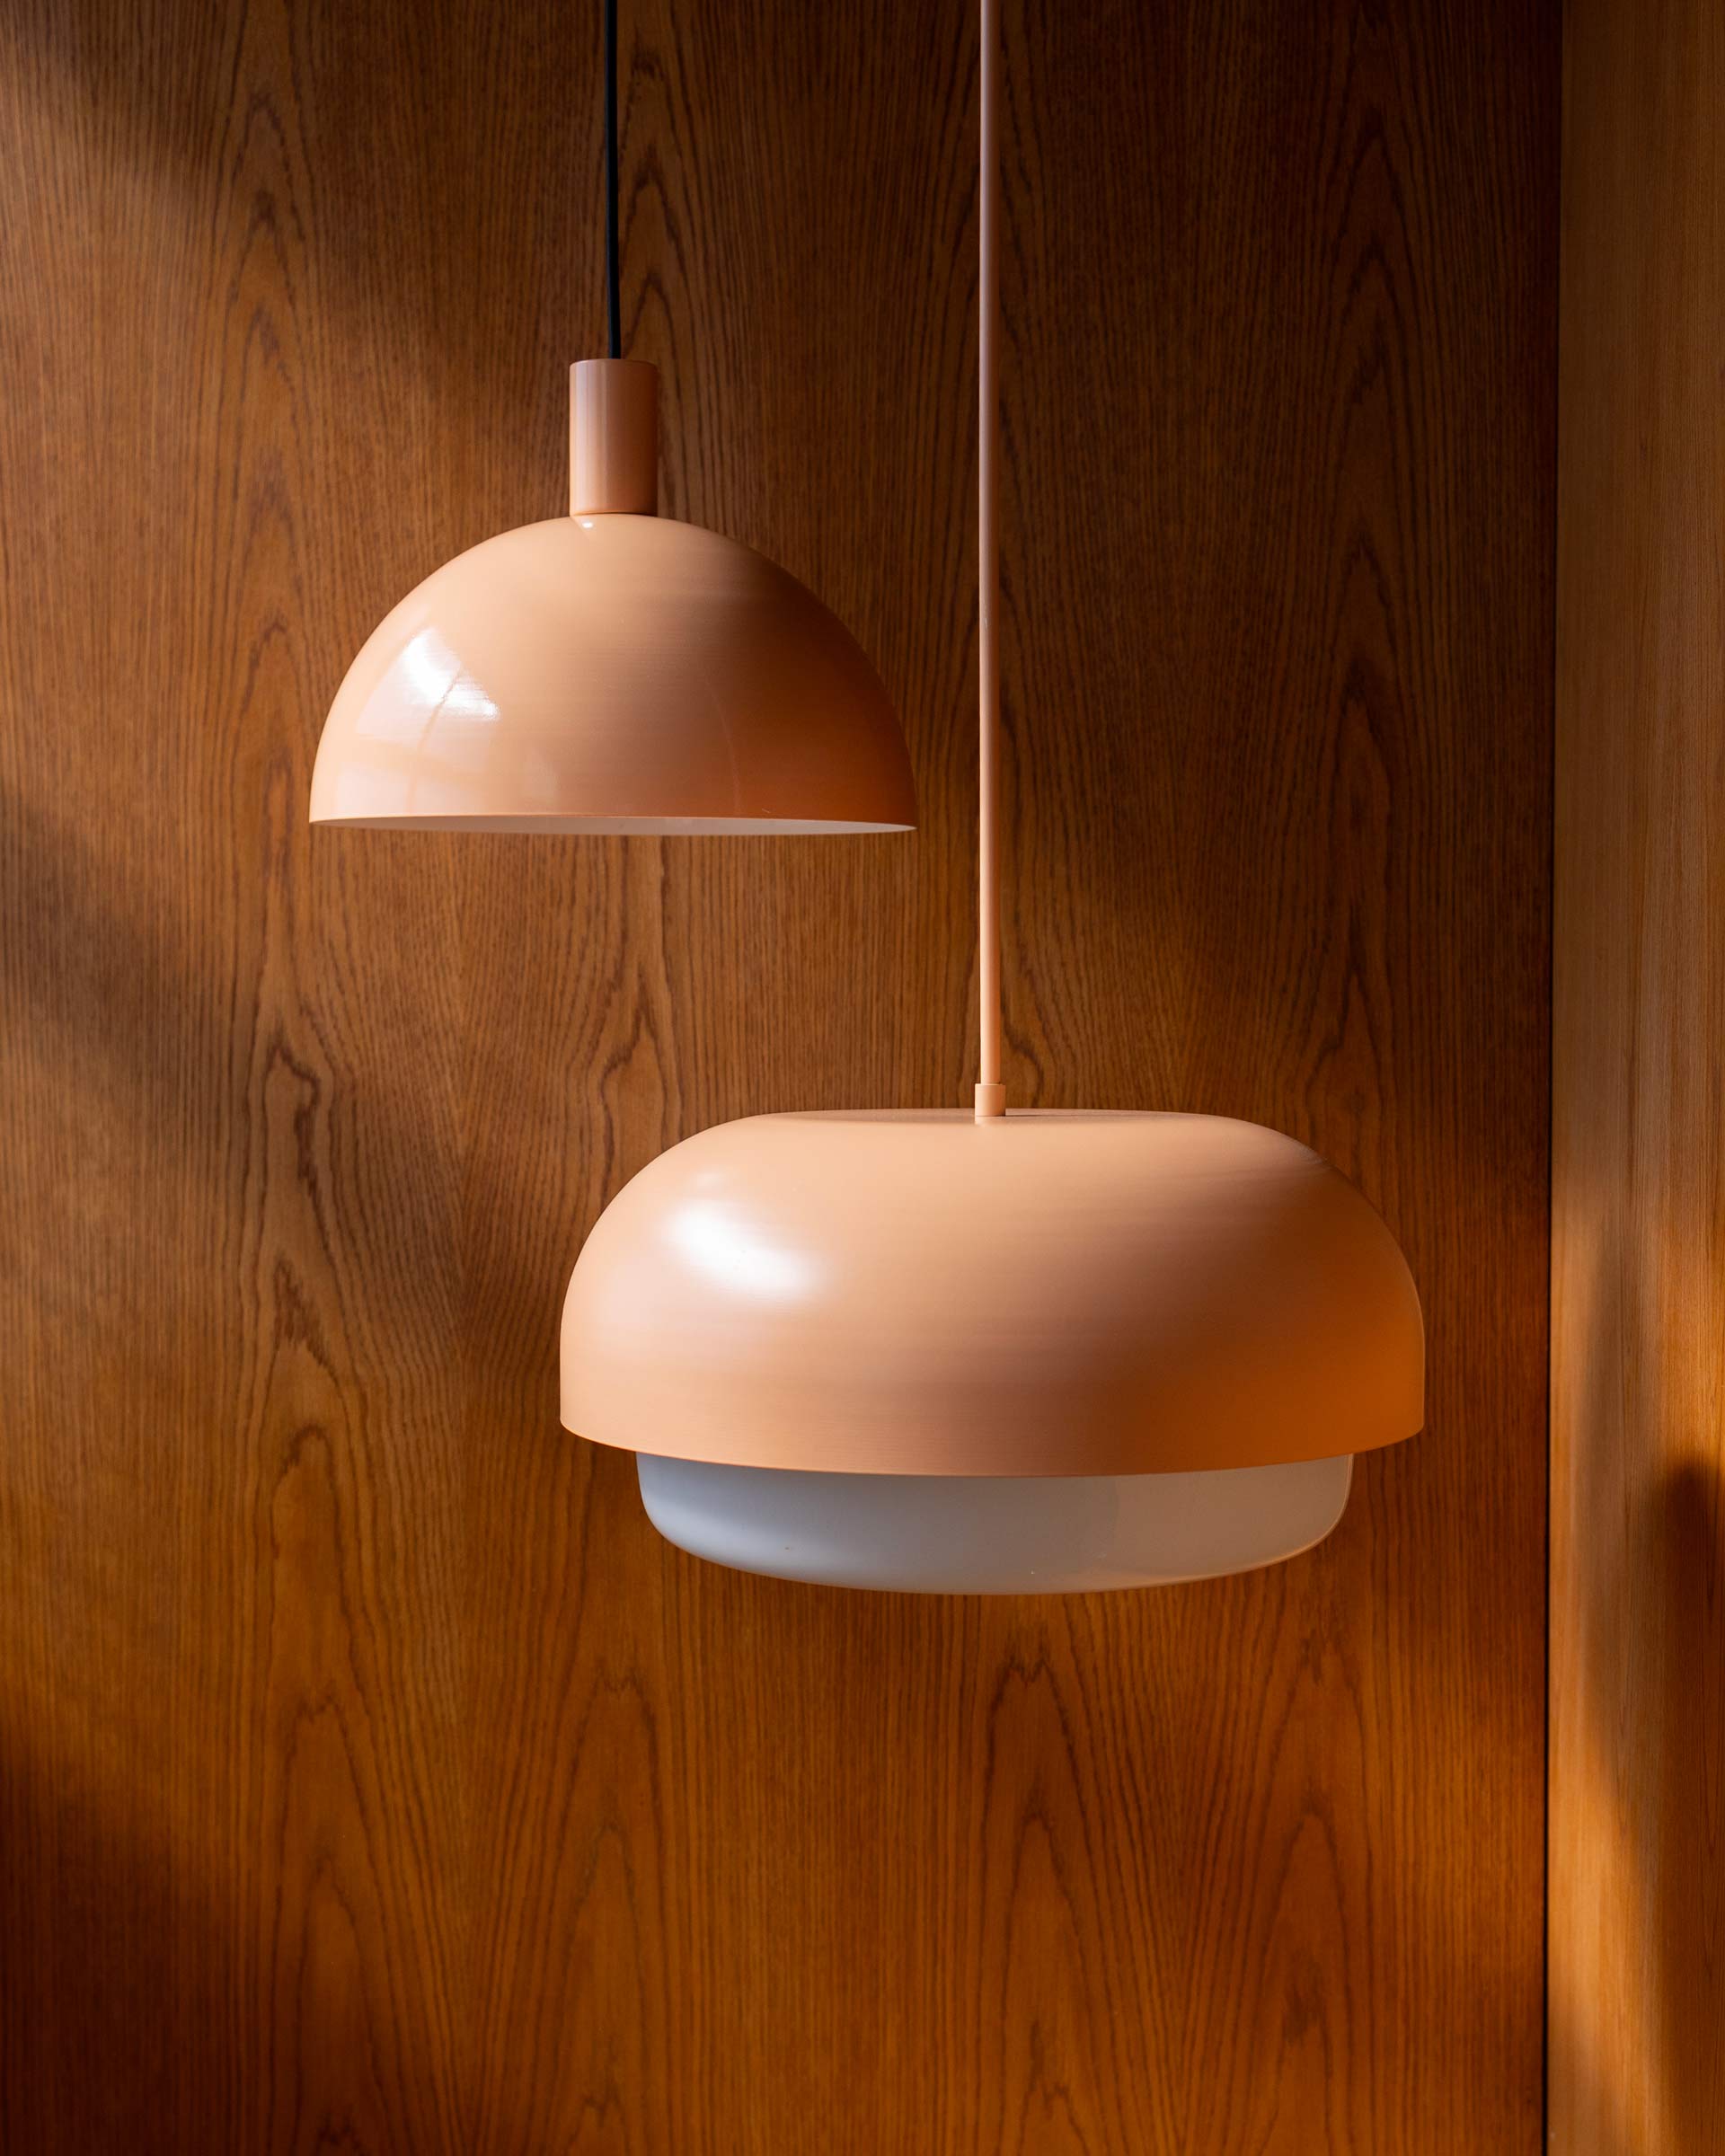 Two light pink pendants hanging on a wood backdrop.